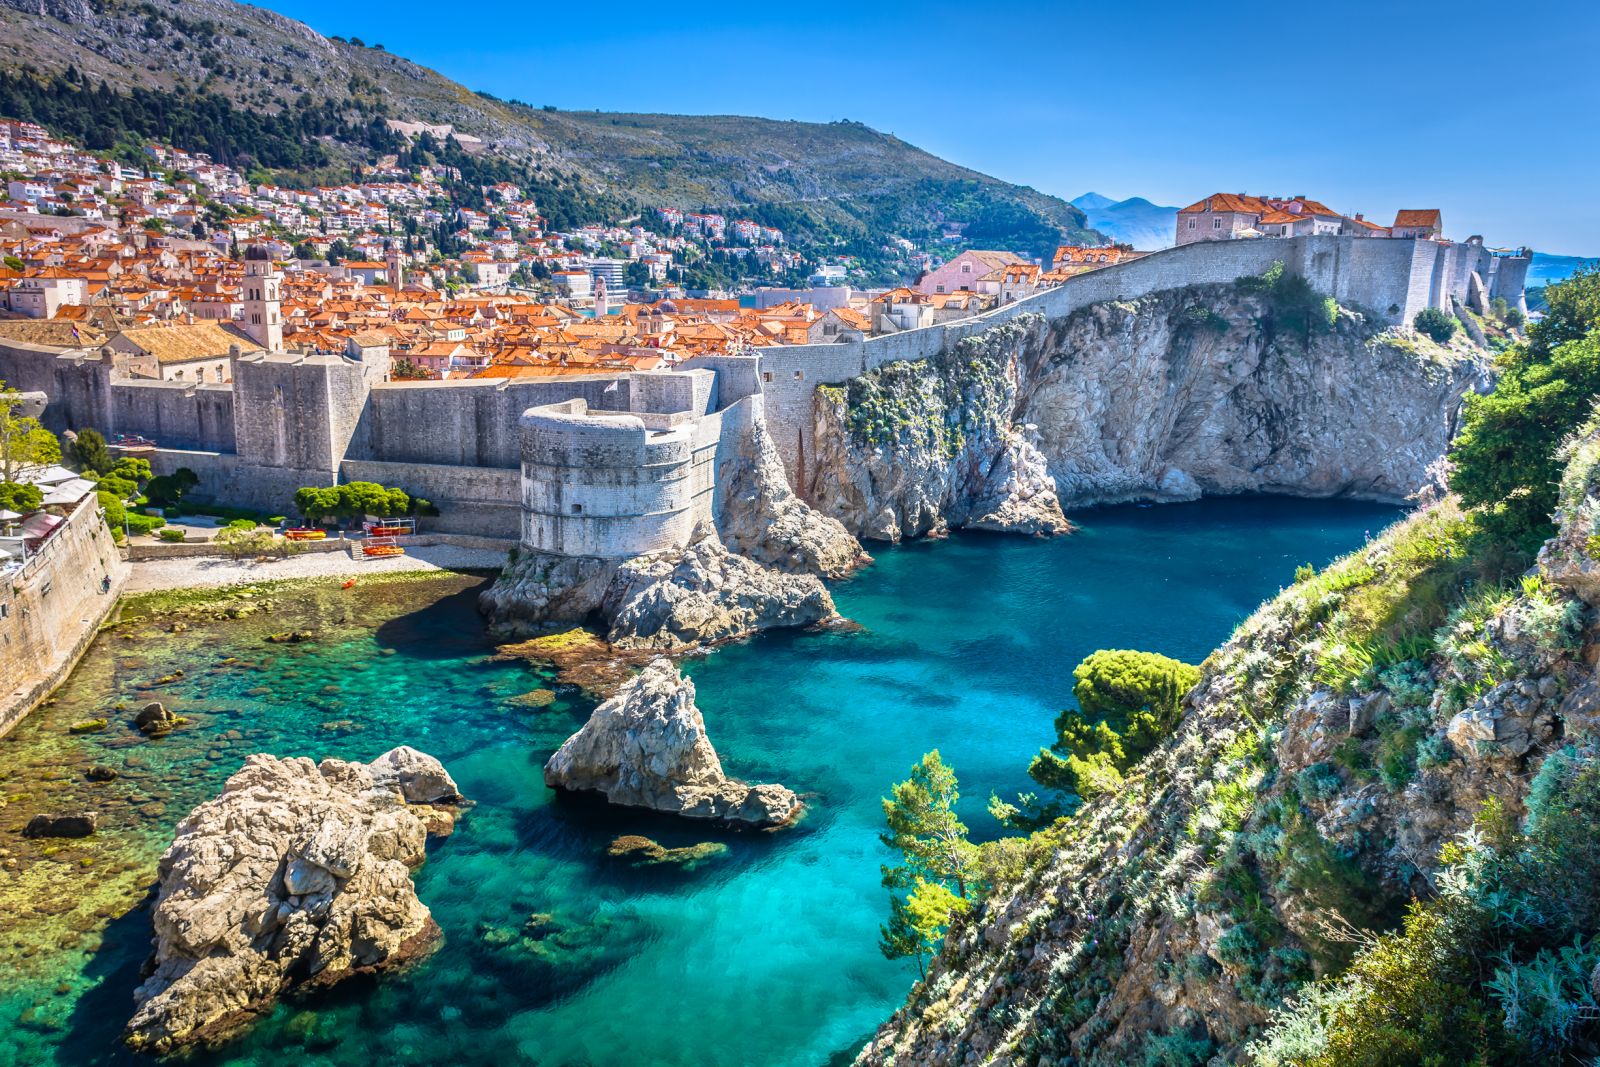 View of Dubrovnik harbour and old town in Croatia